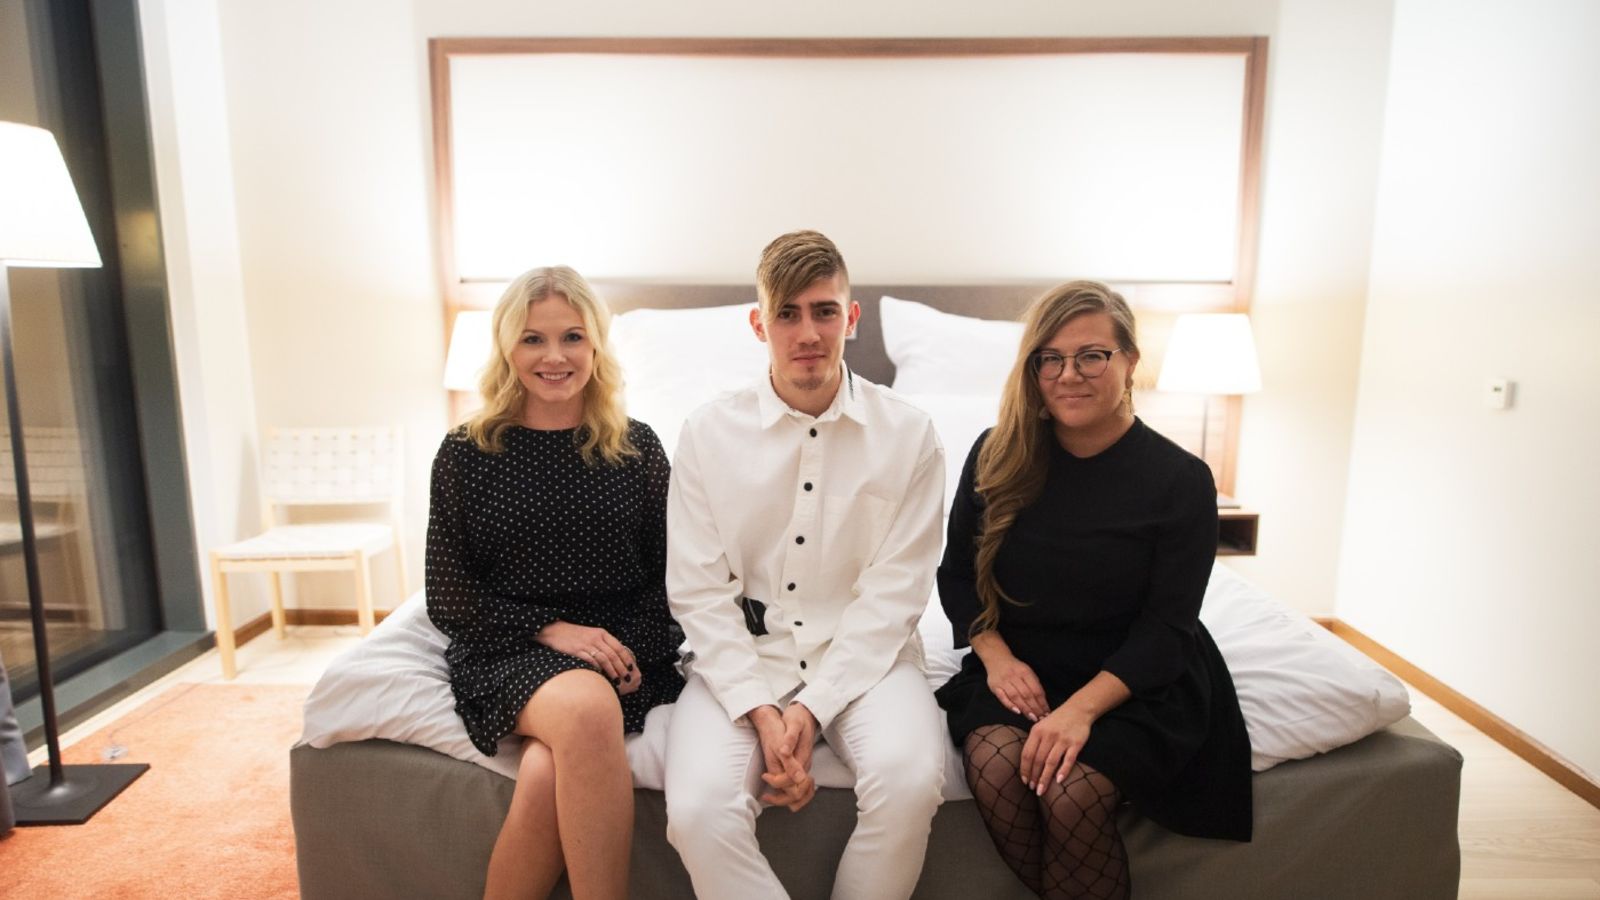 3 finnish influencers on a hotel bed